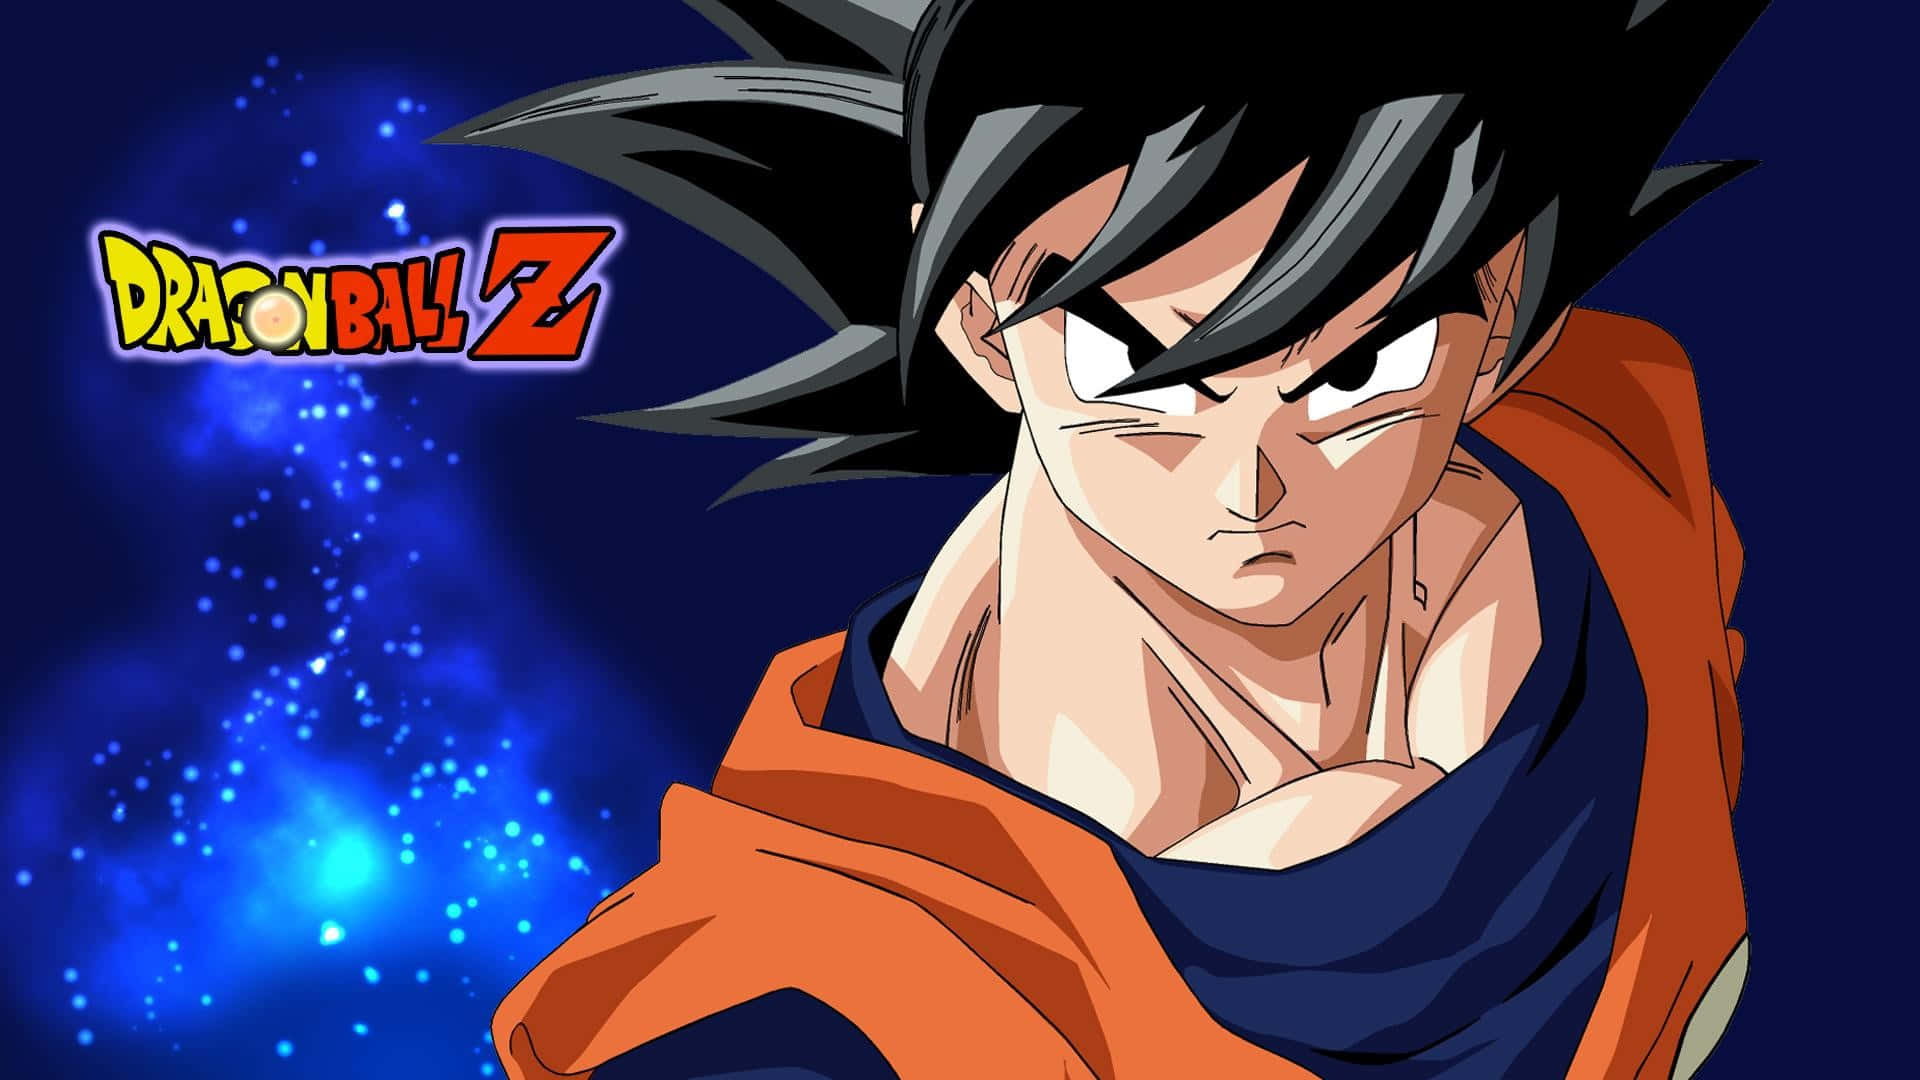 Goku gets ready to face an epic battle